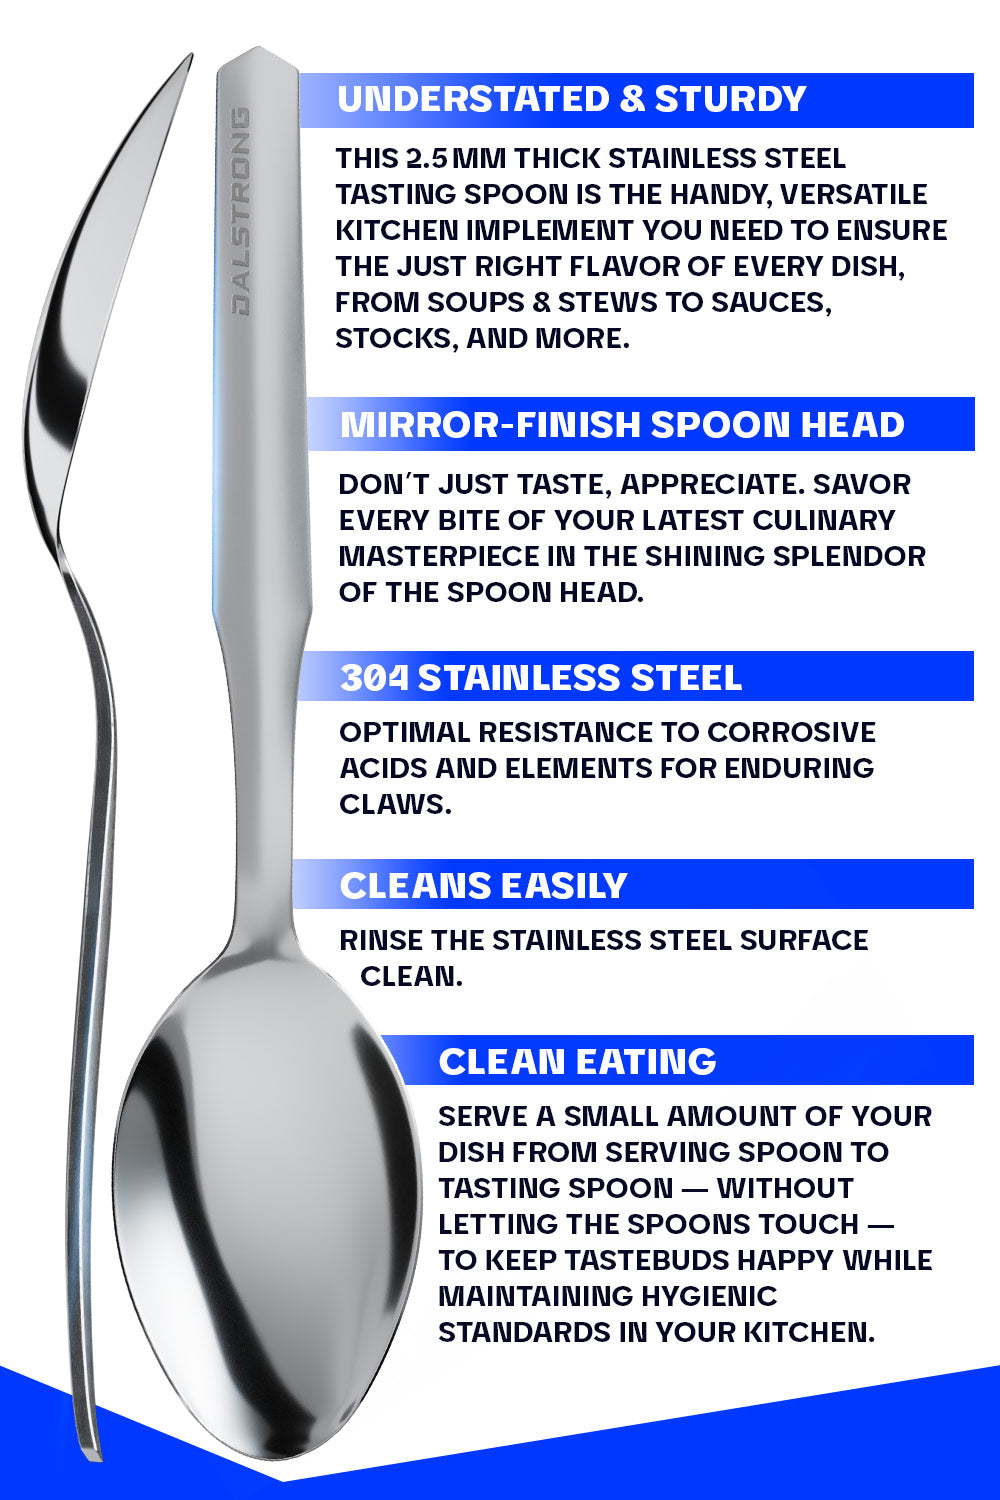 Dalstrong professional chef tasting and plating spoon specification.